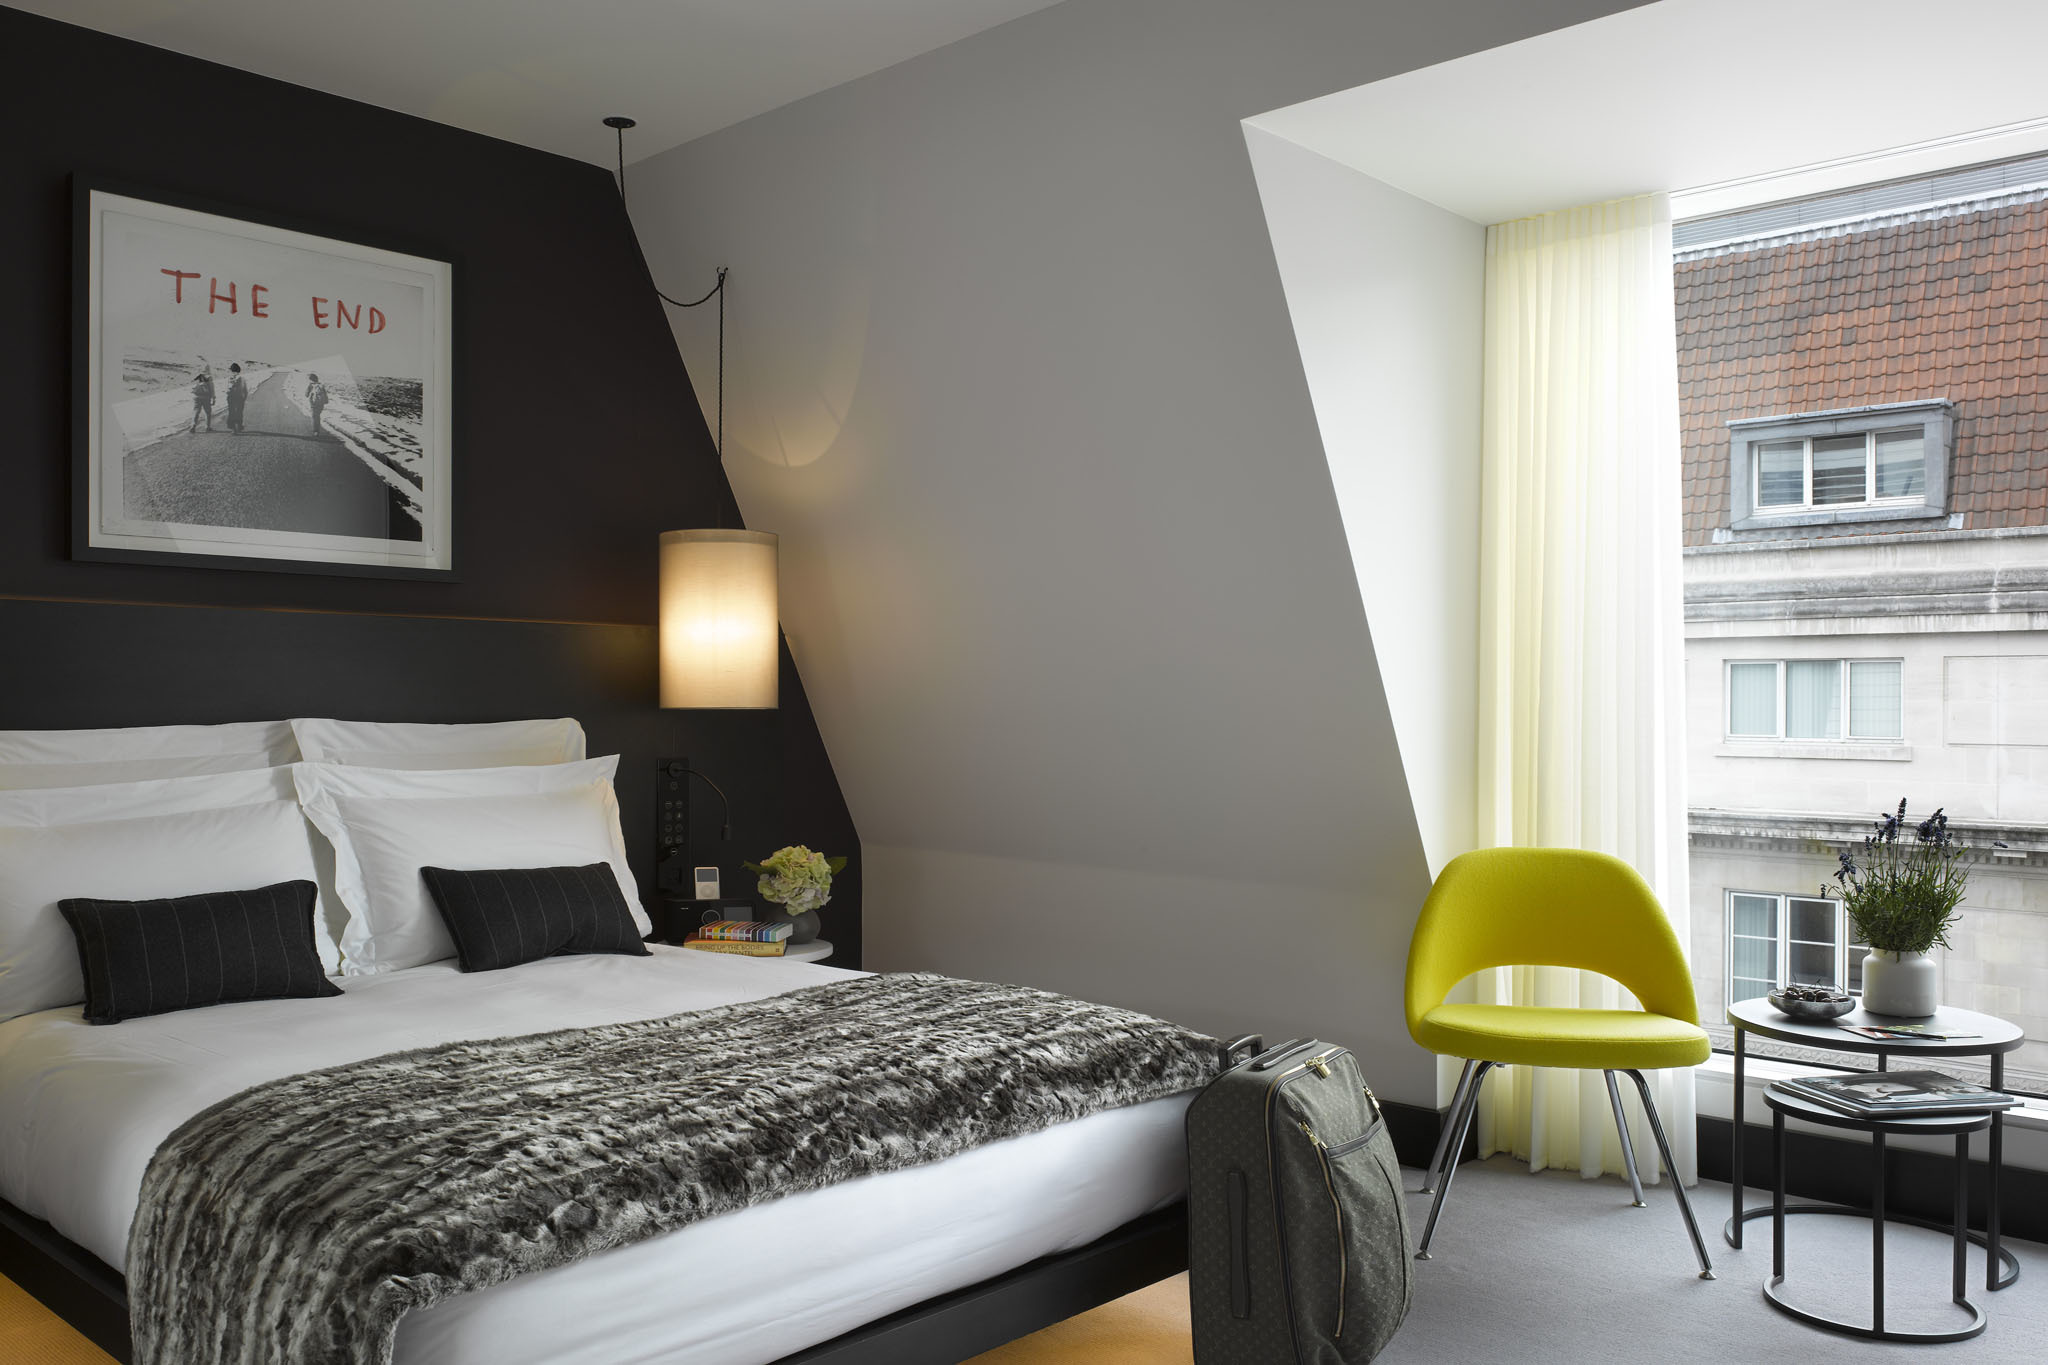 How to Find Accommodation During a Stay in London?